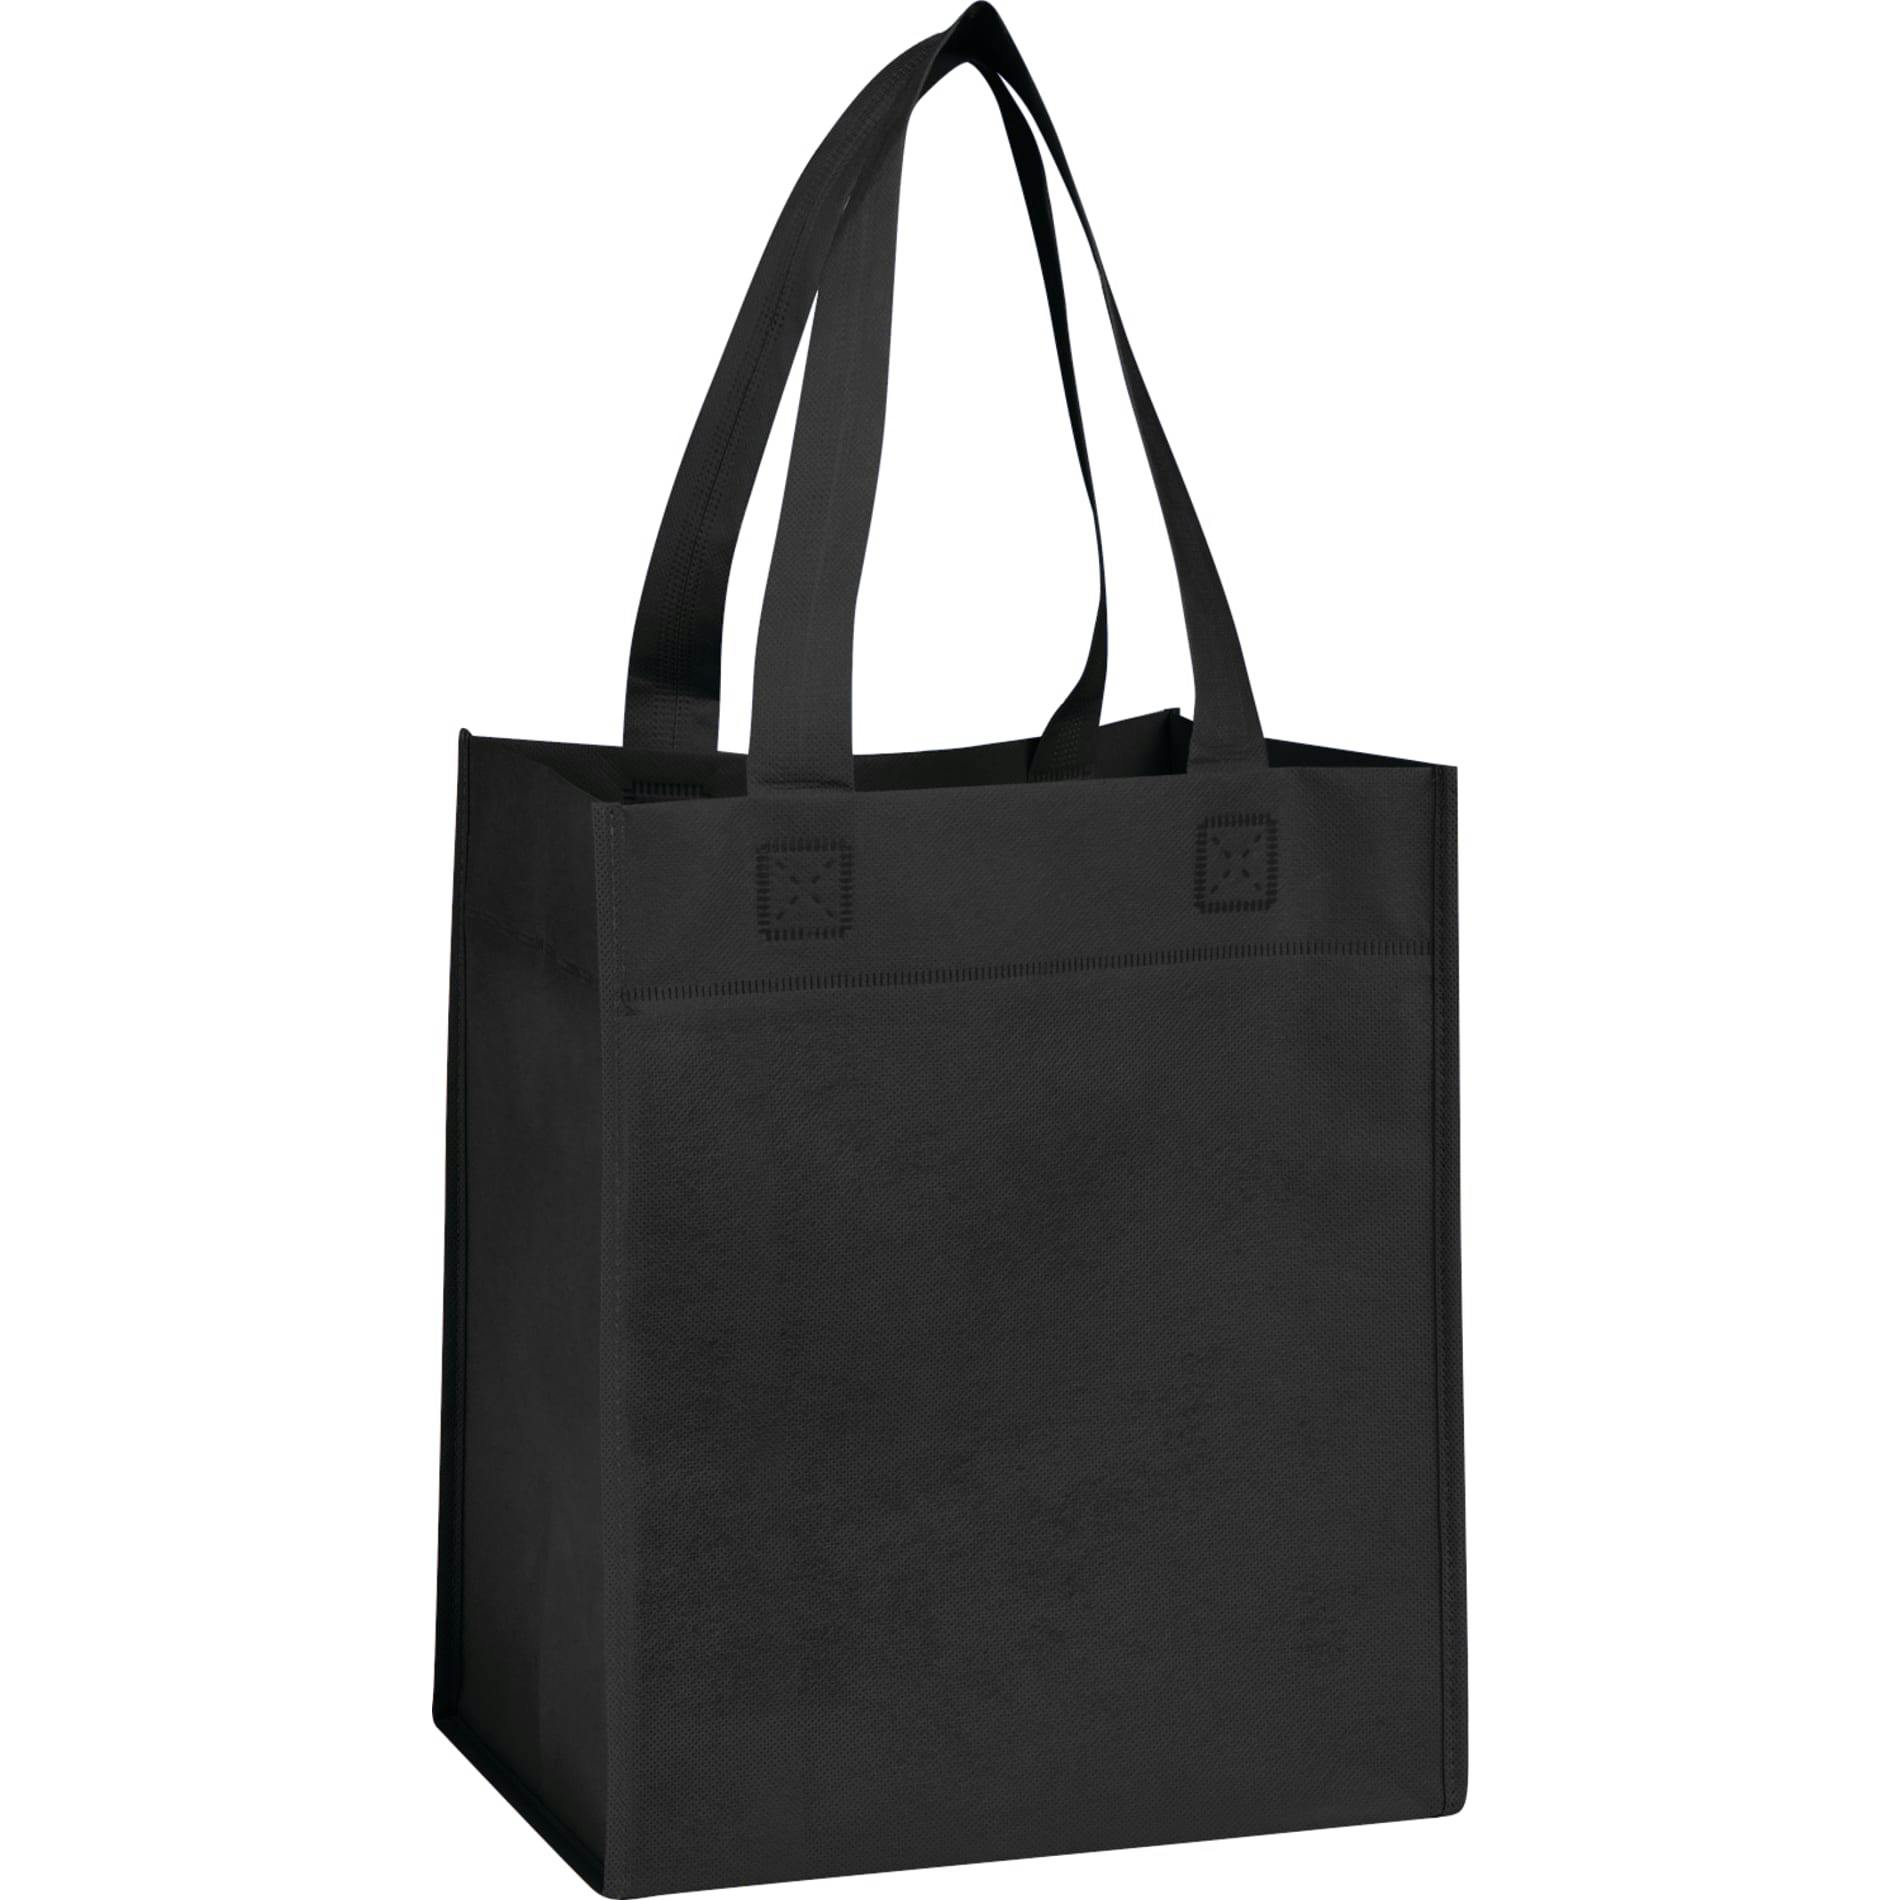 Basic Grocery Tote - additional Image 1